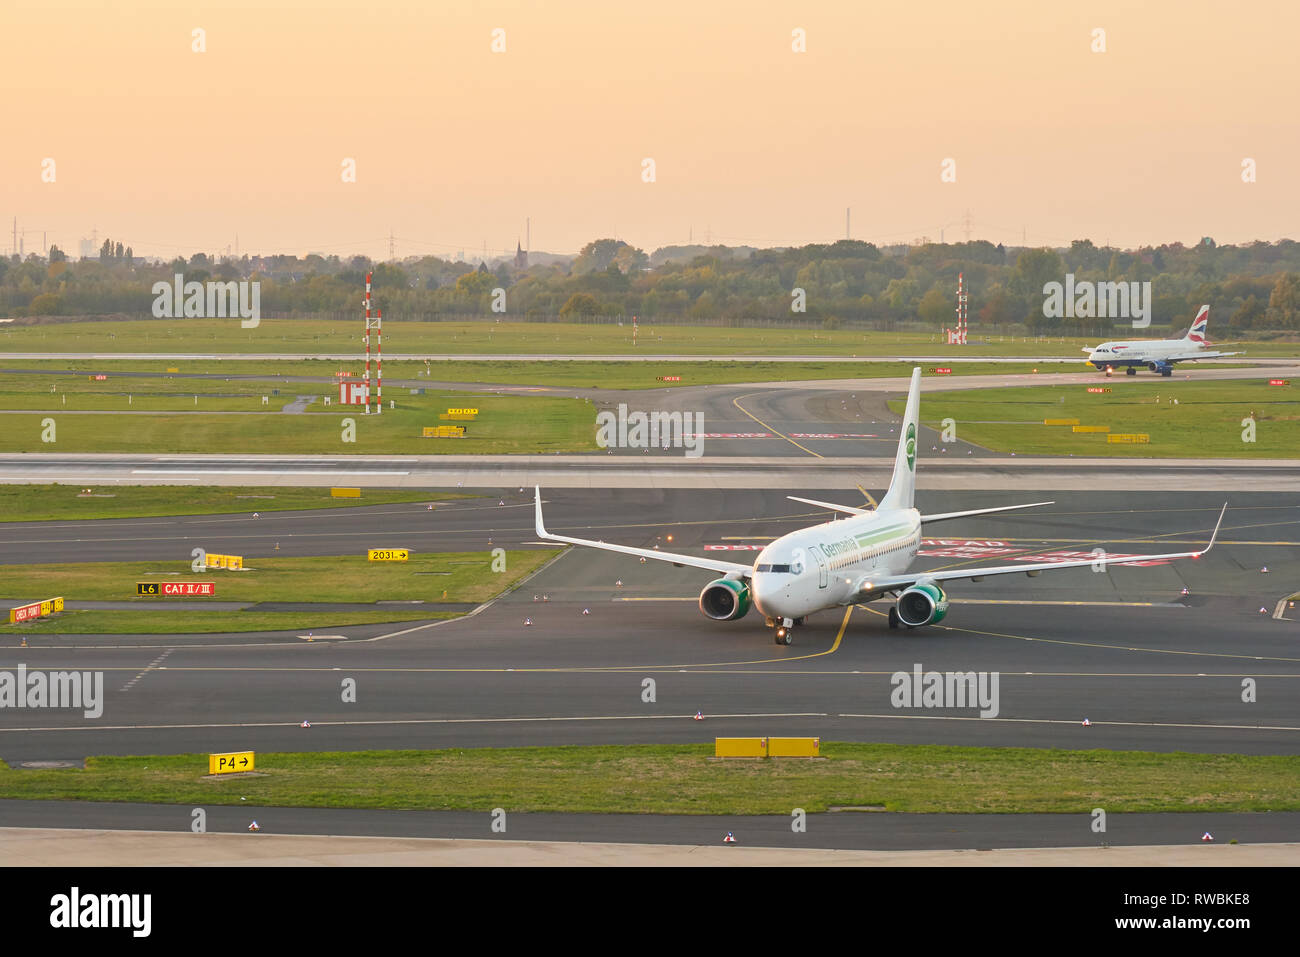 DUSSELDORF, GERMANY - CIRCA OCTOBER, 2018: airplane taxi at Dusseldorf Airport. Stock Photo